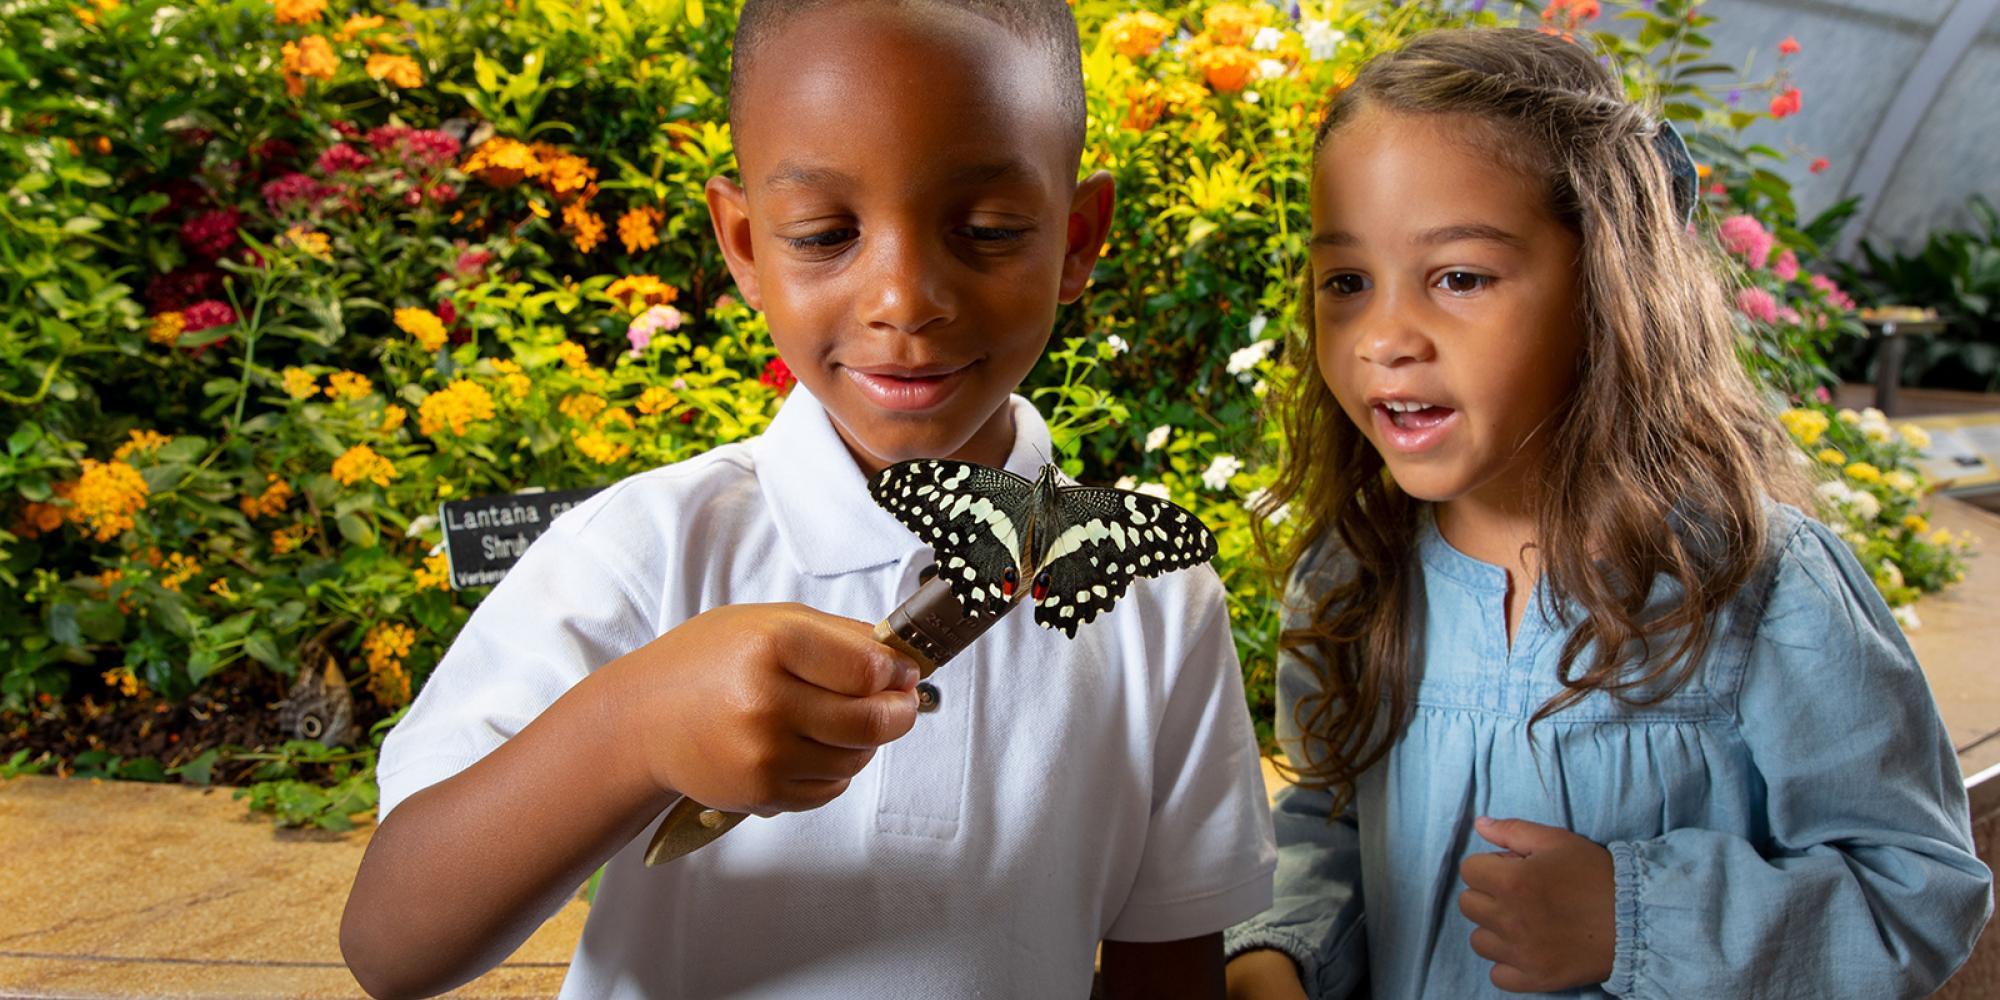 A boy smiles as he looks at a butterfly sitting on a paint brush he is holding, while a girl next to him watches in wonder.